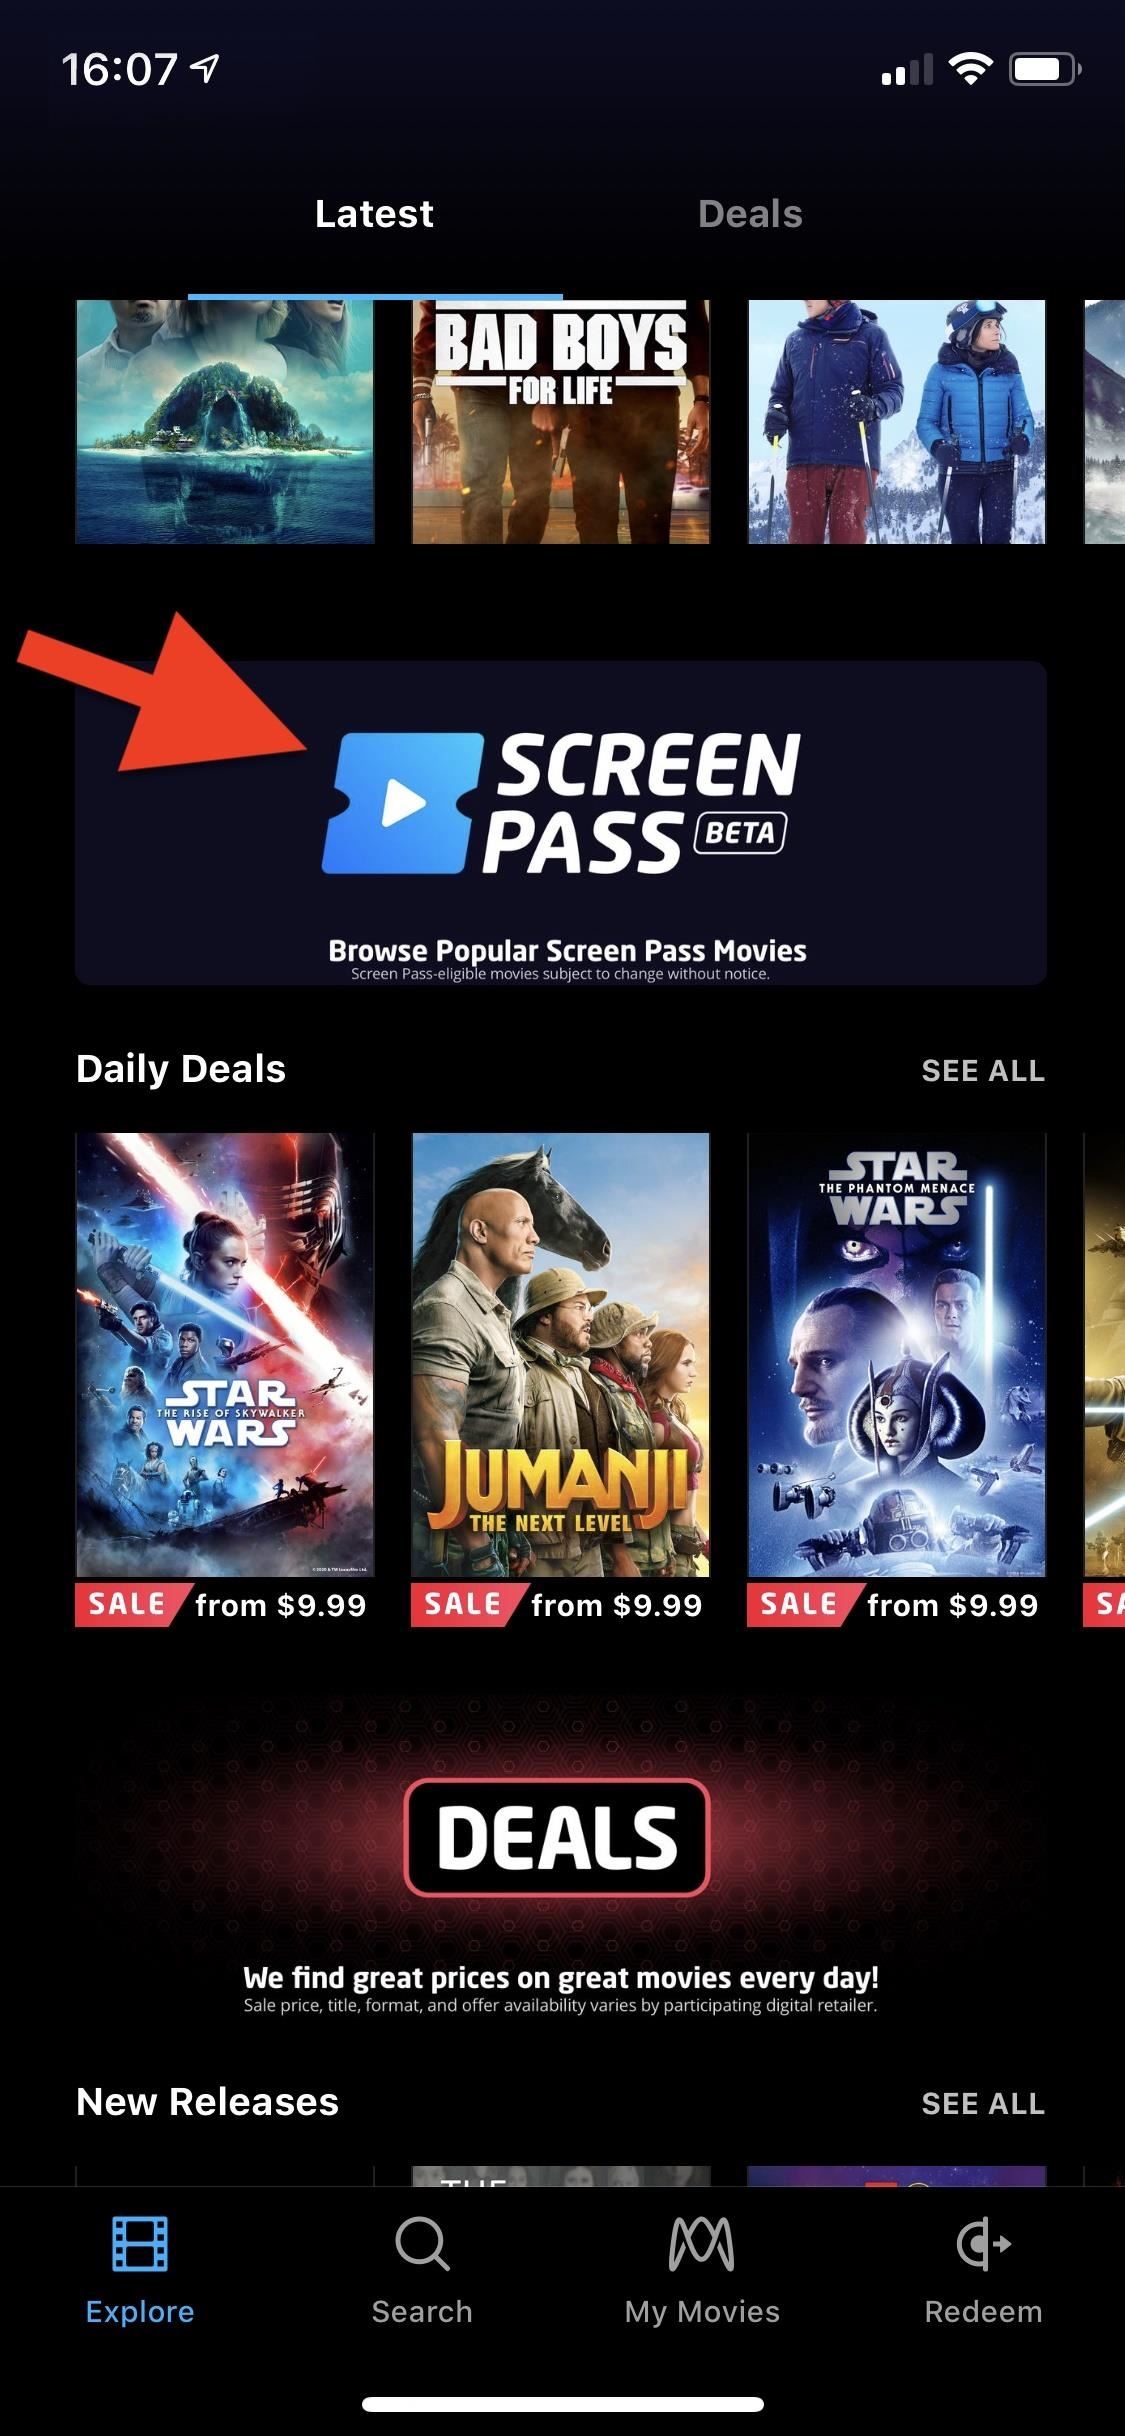 Own a Ton of Digital Movies? Let Others Watch Them for Free with Screen Passes